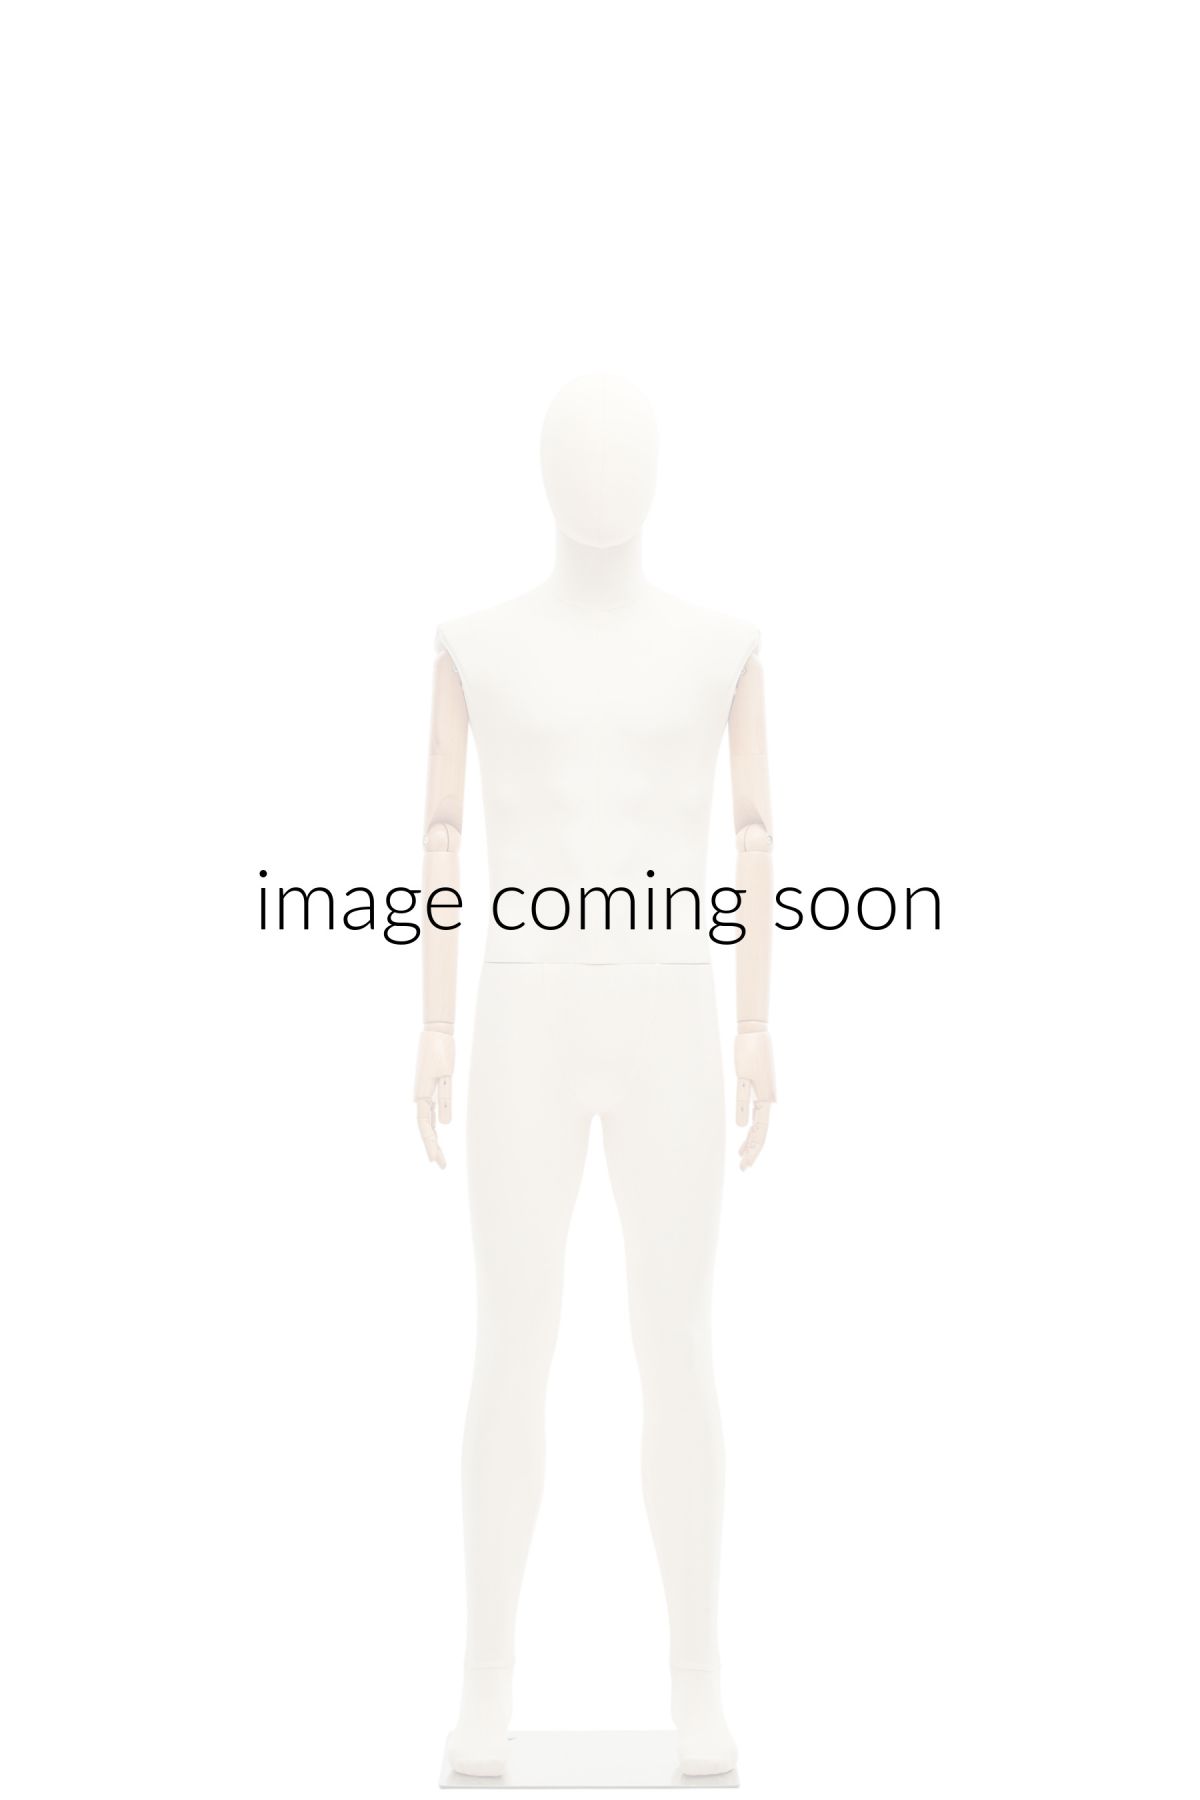 Female Full Body Mannequin in Standing or Sitting Pose - Fabric Wrapped